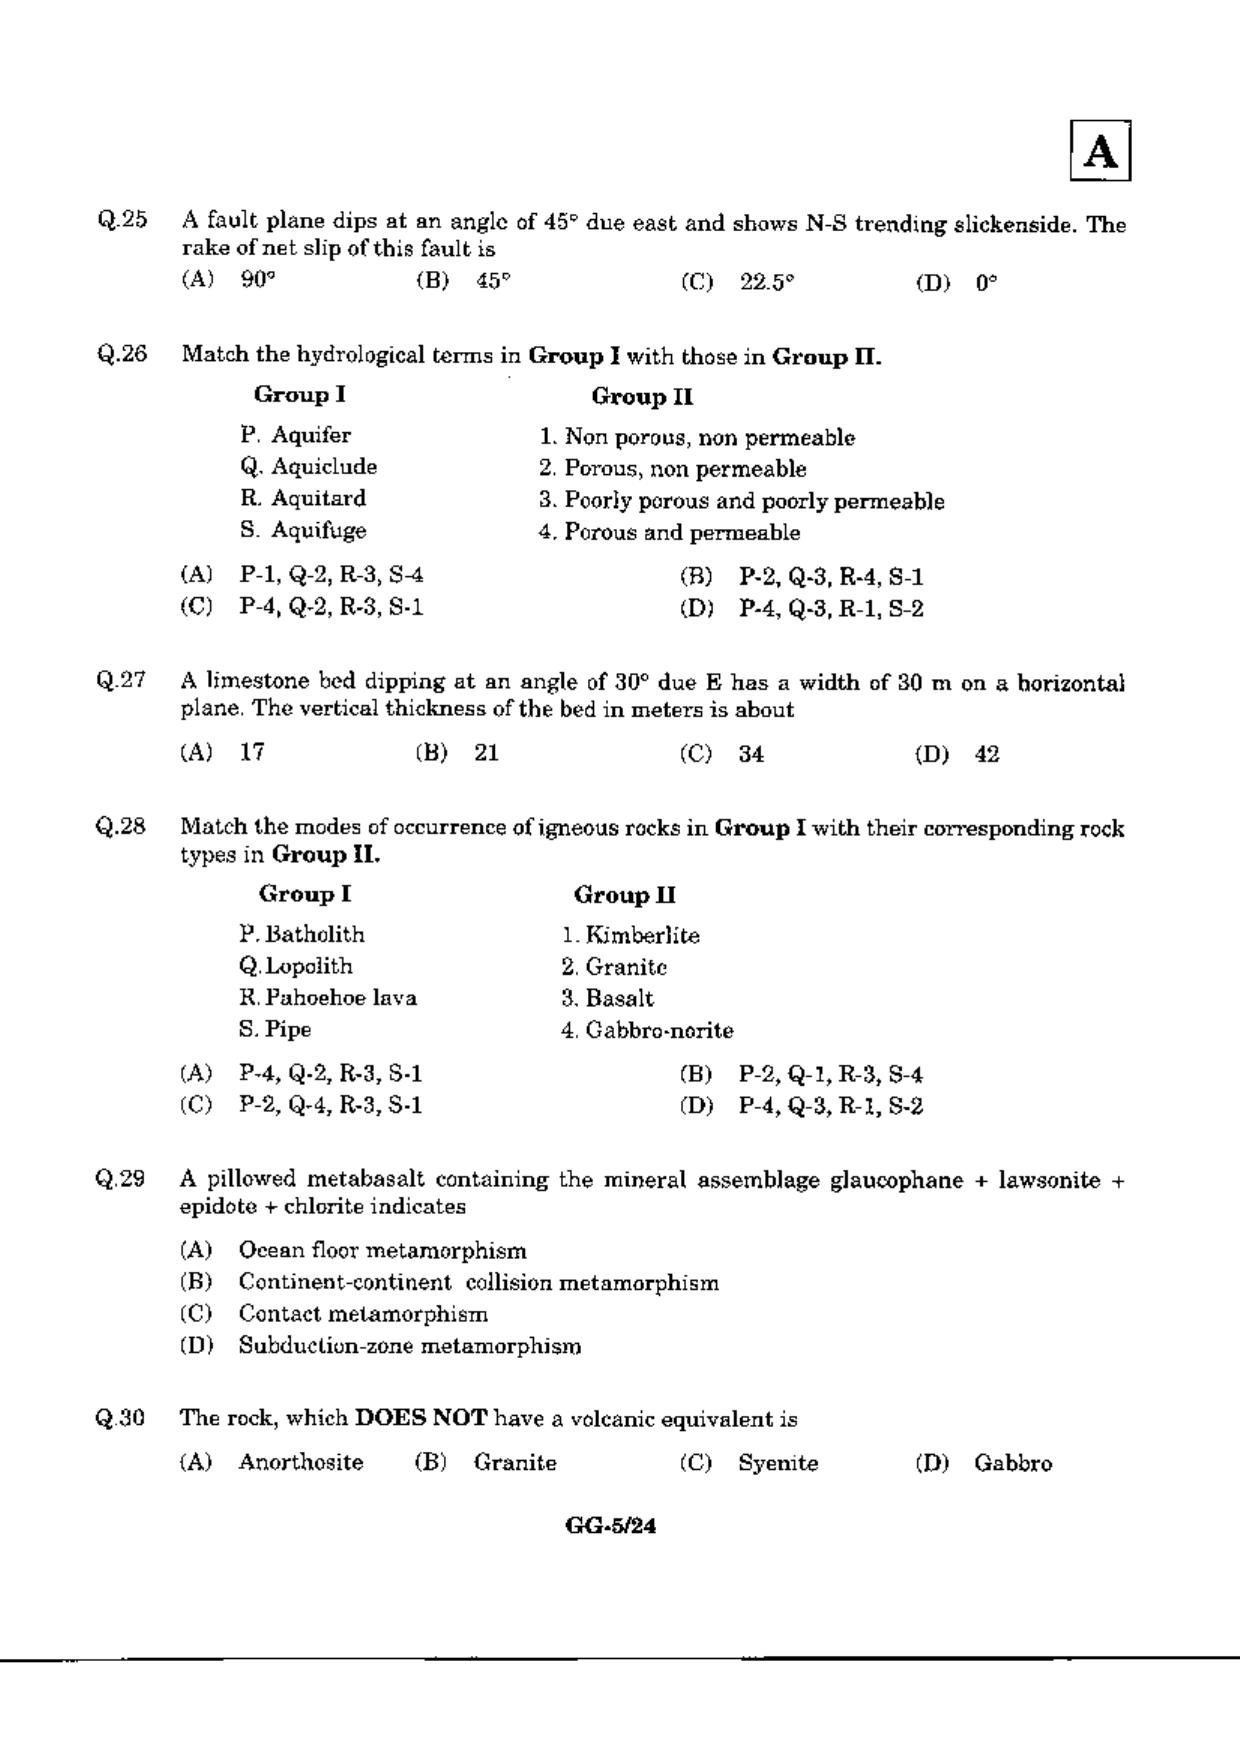 JAM 2010: GG Question Paper - Page 7